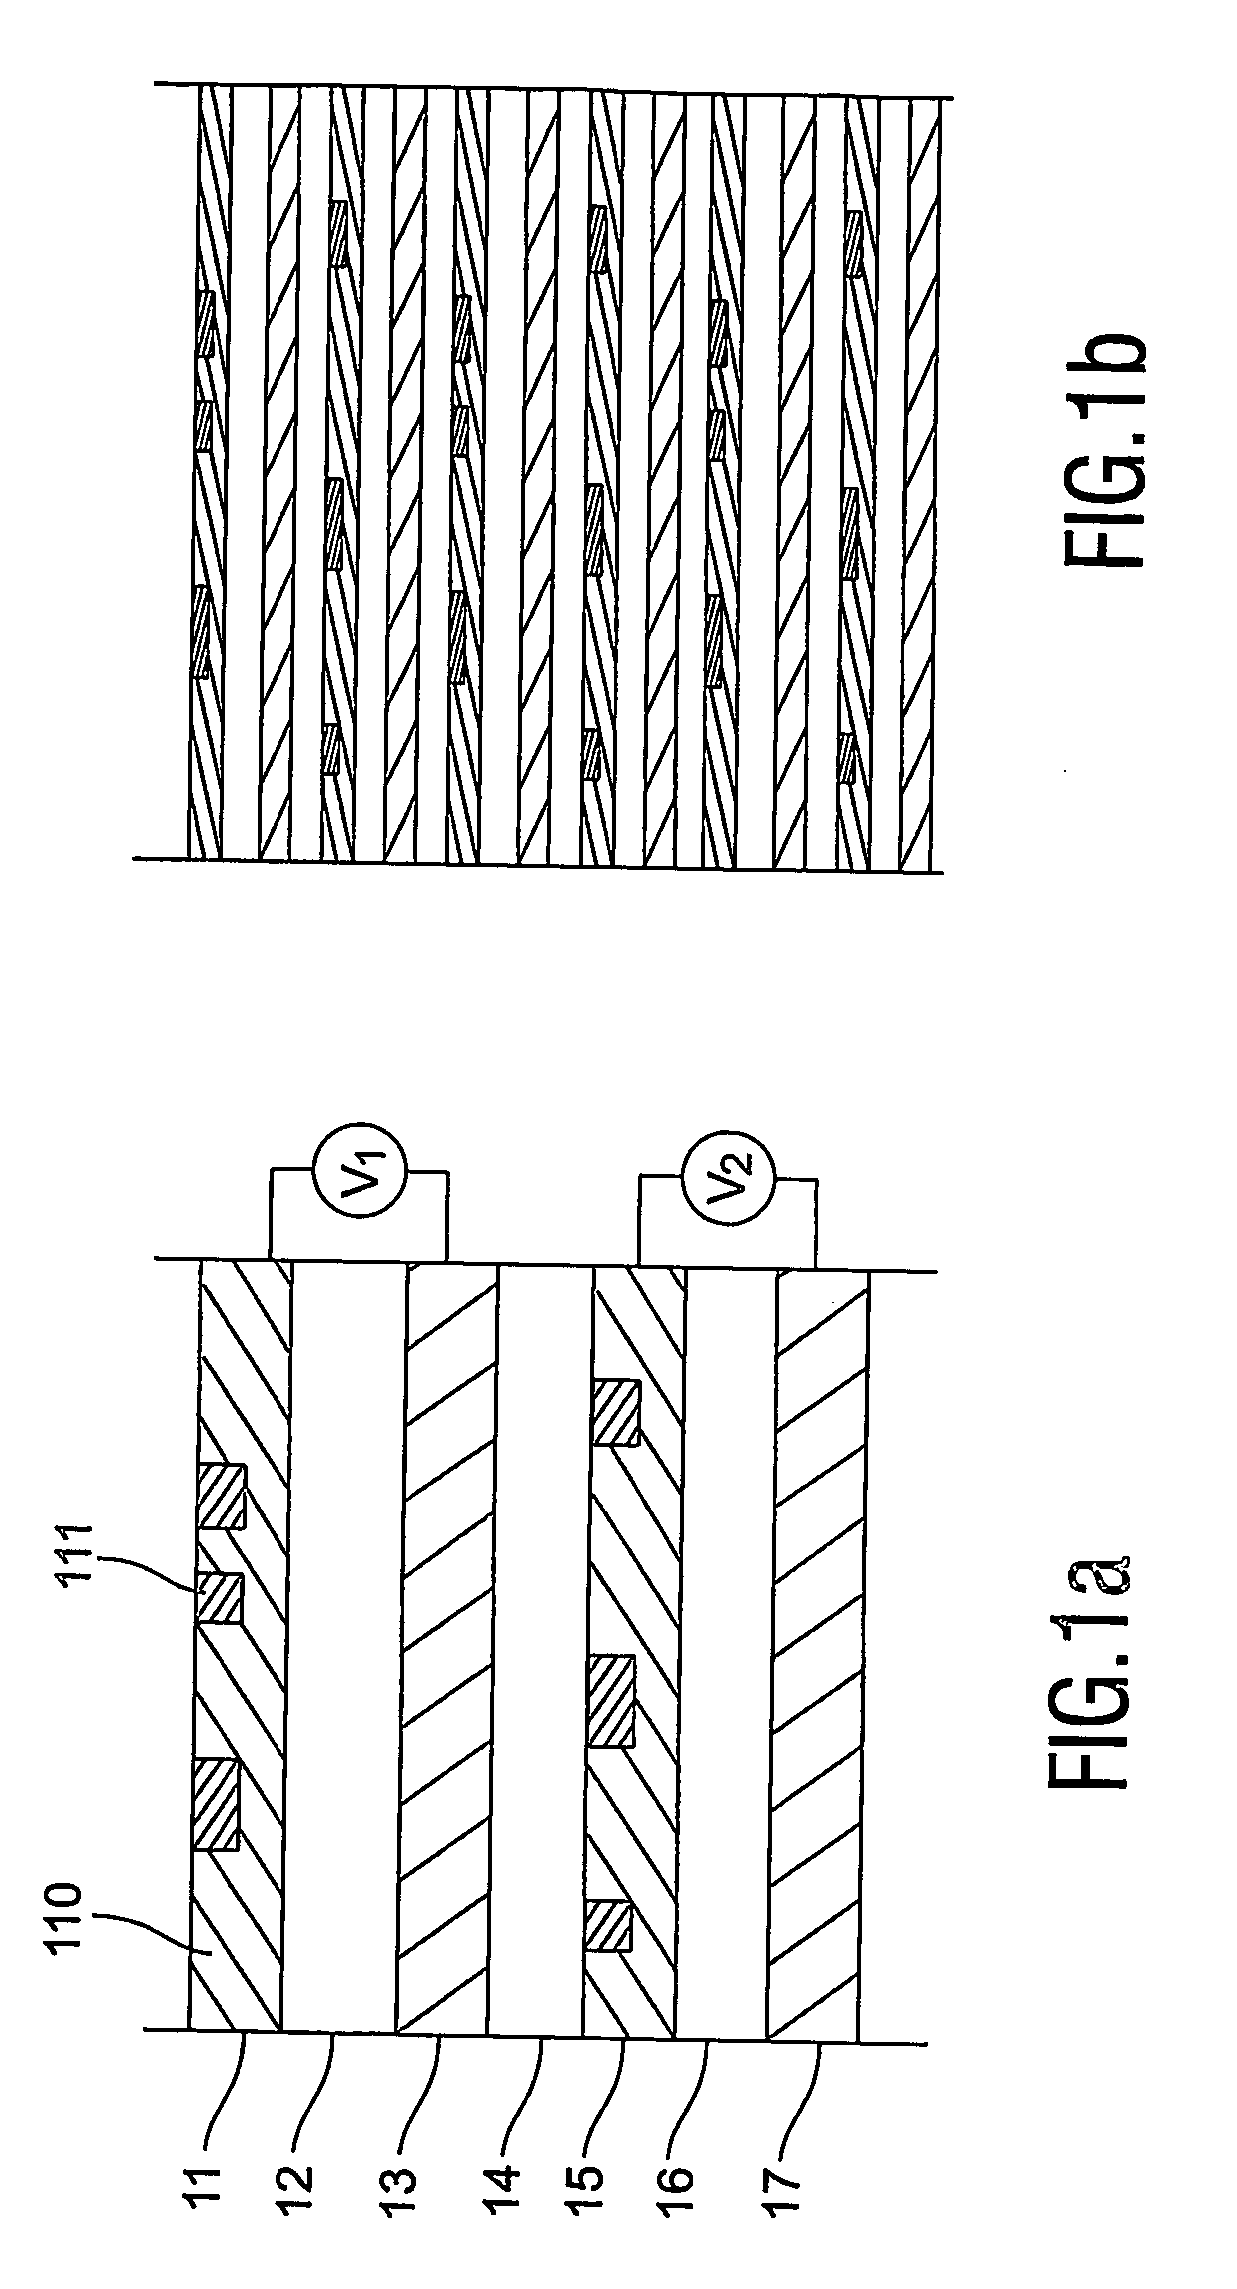 Multi-stack fluorescent information carrier with electrochromic materials